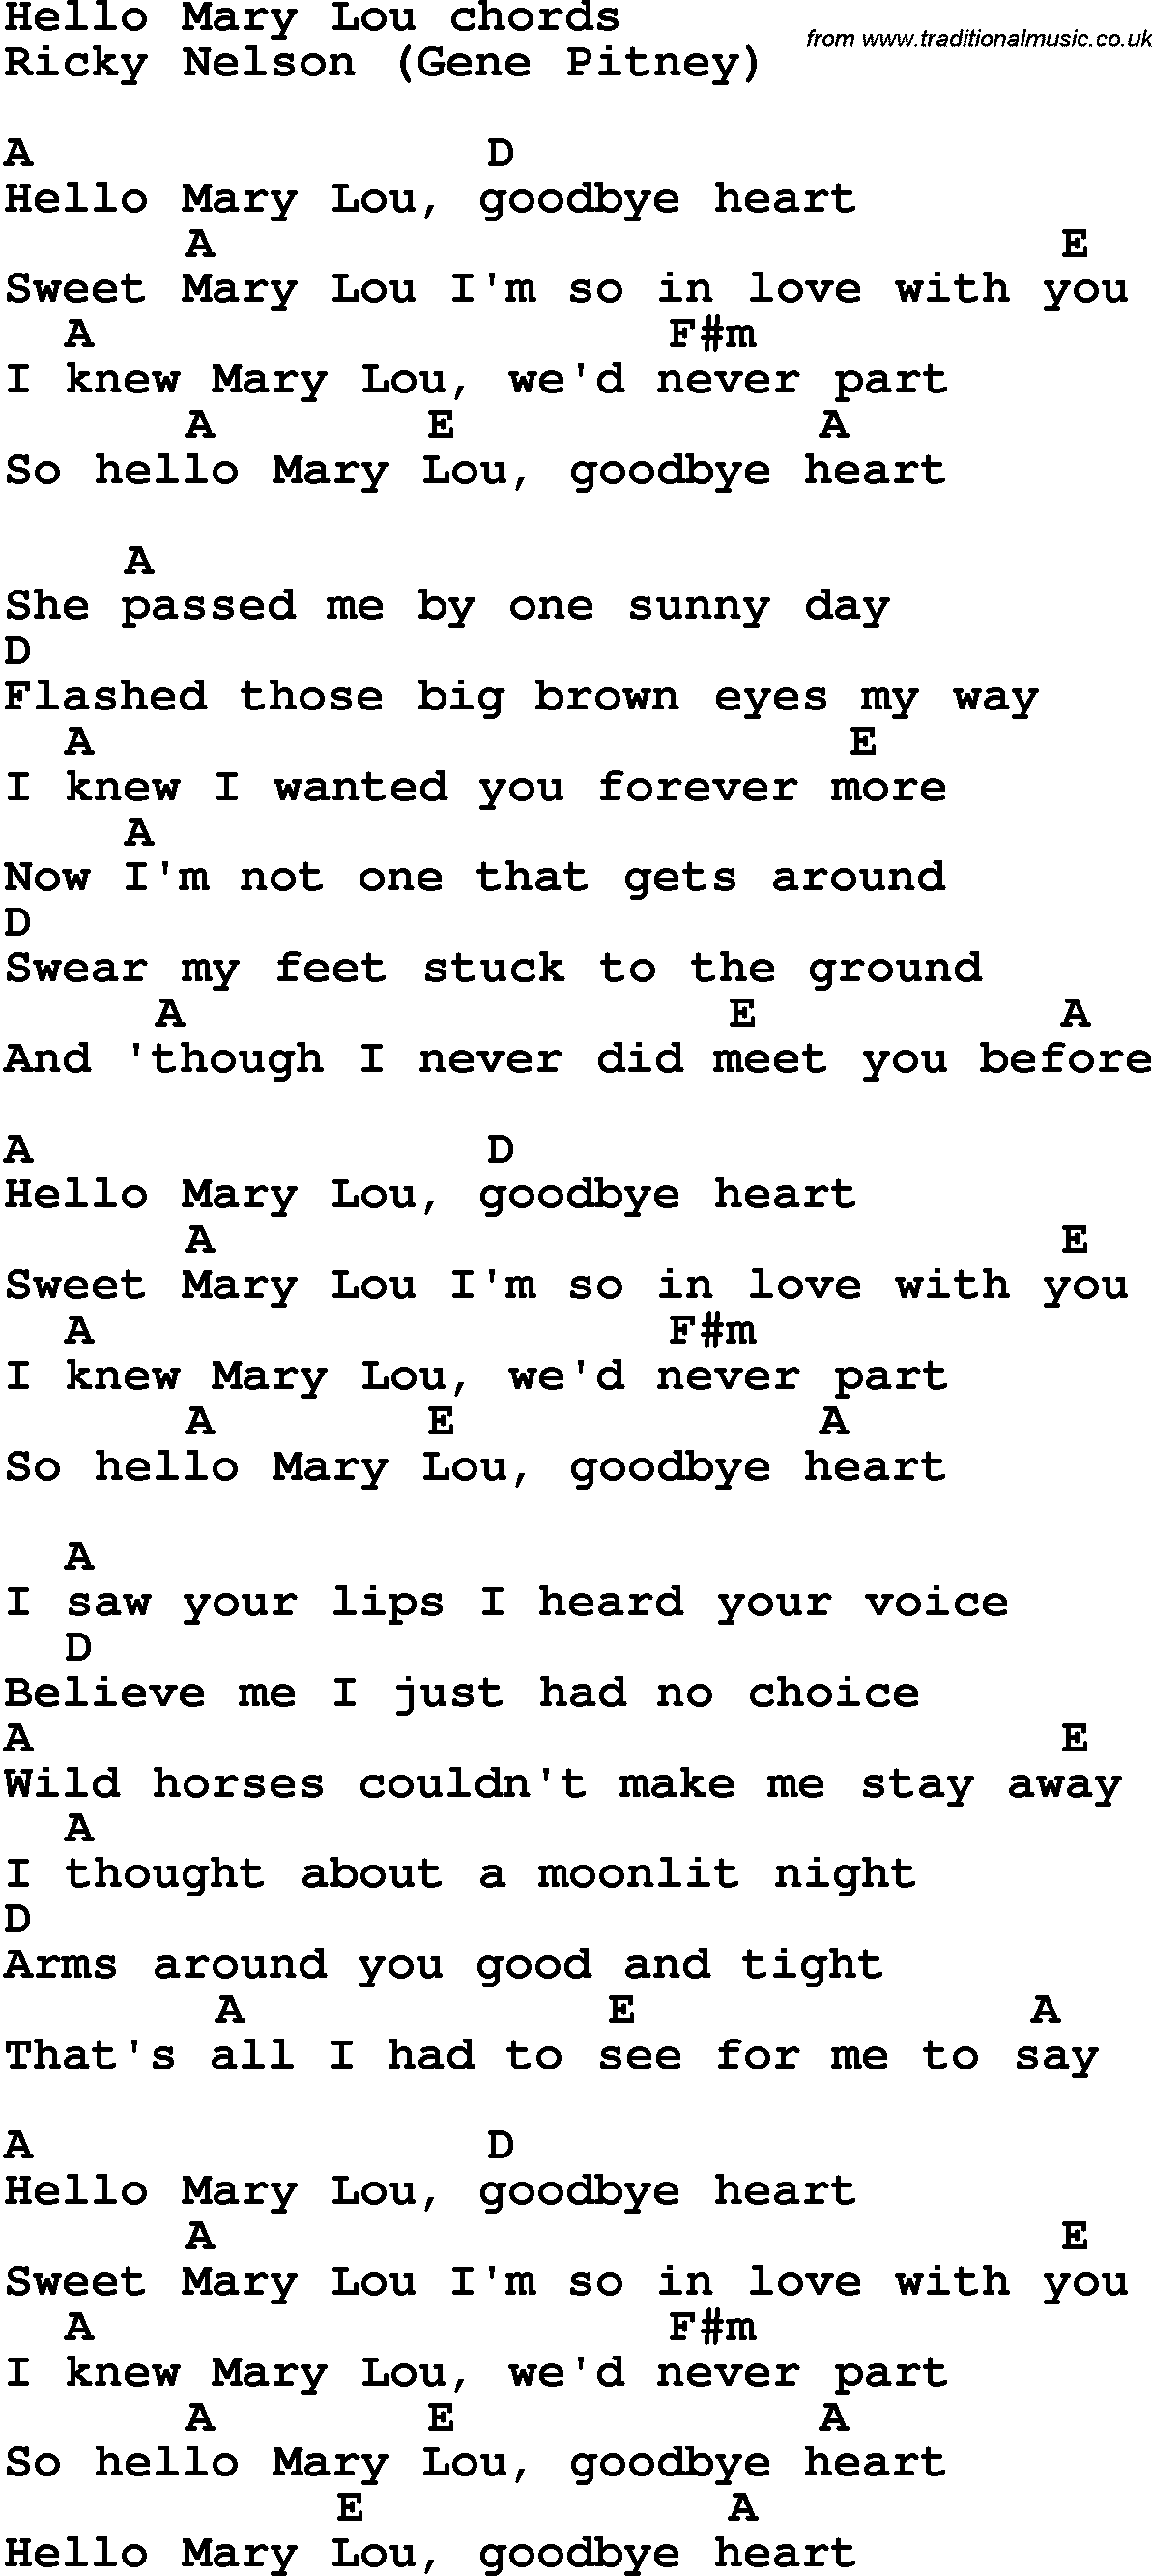 Song Lyrics with guitar chords for Hello Mary Lou